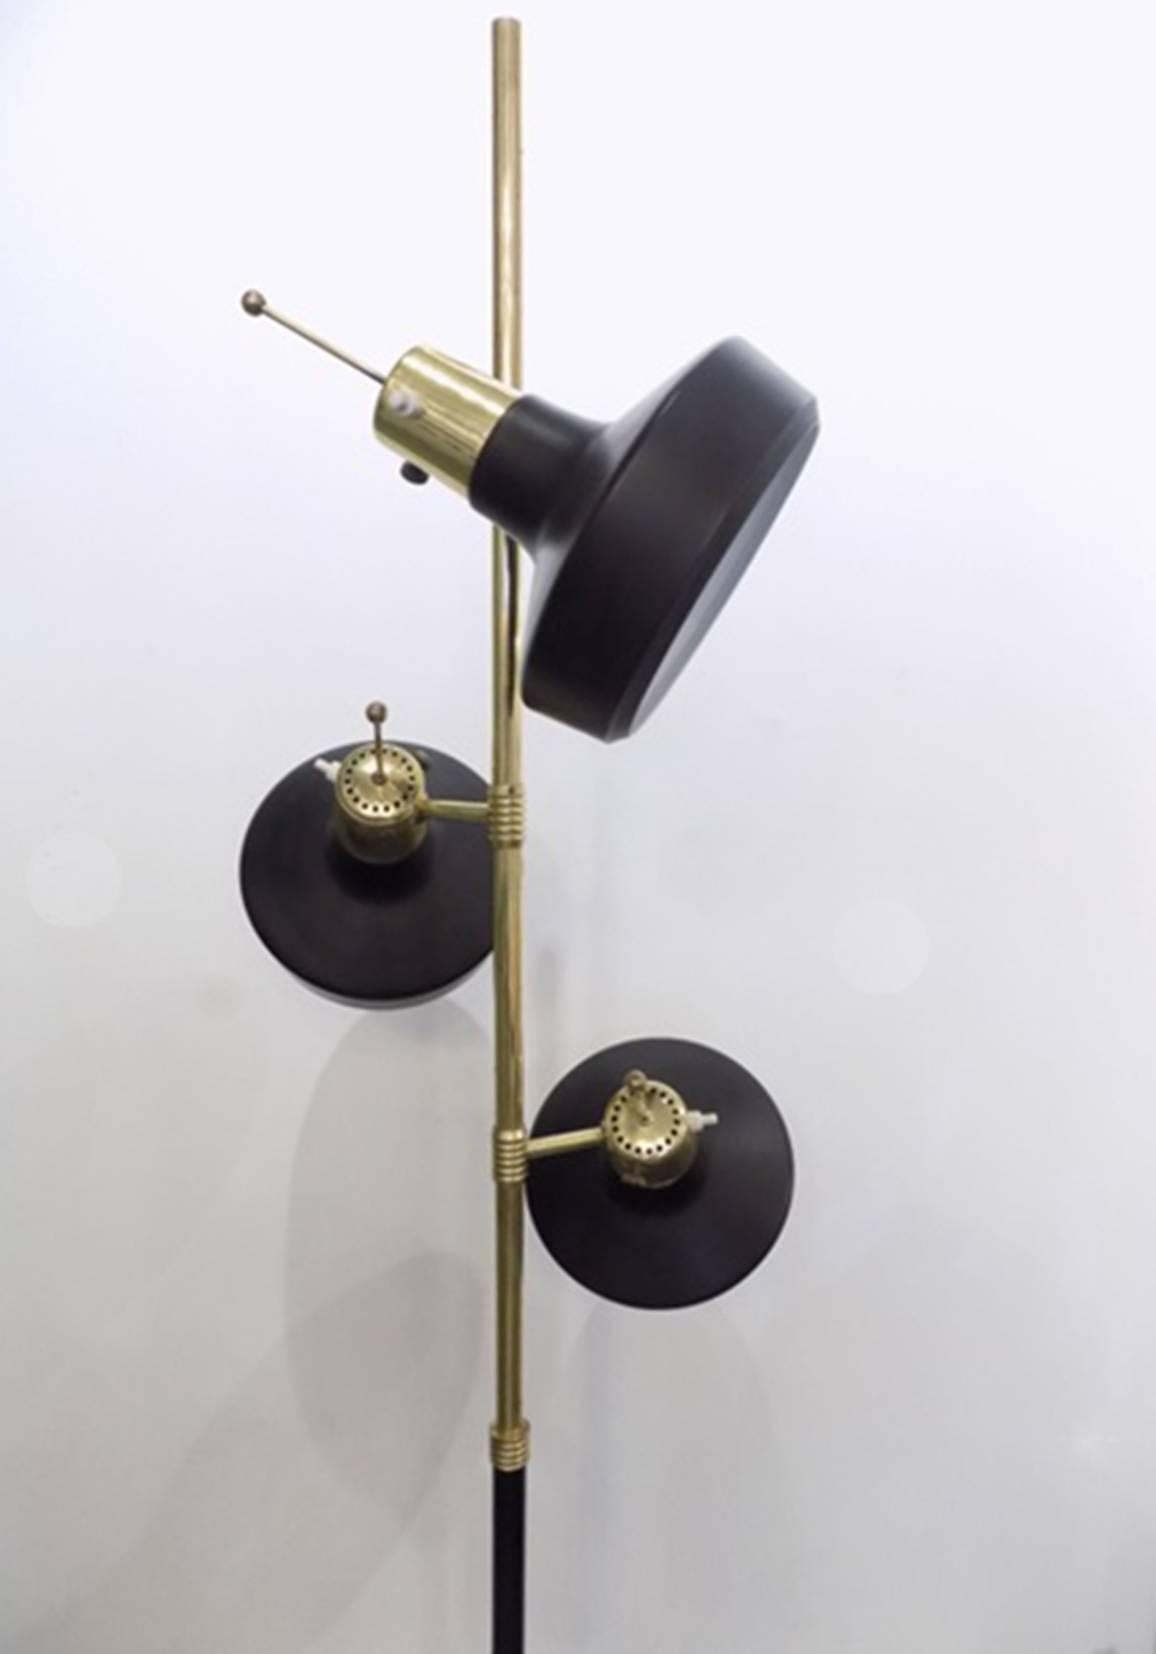 A Monix floor lamp, Paris, circa 1960 
three adjustable Directional light points. 
Brass spindle and black enamel lights with white interiors.